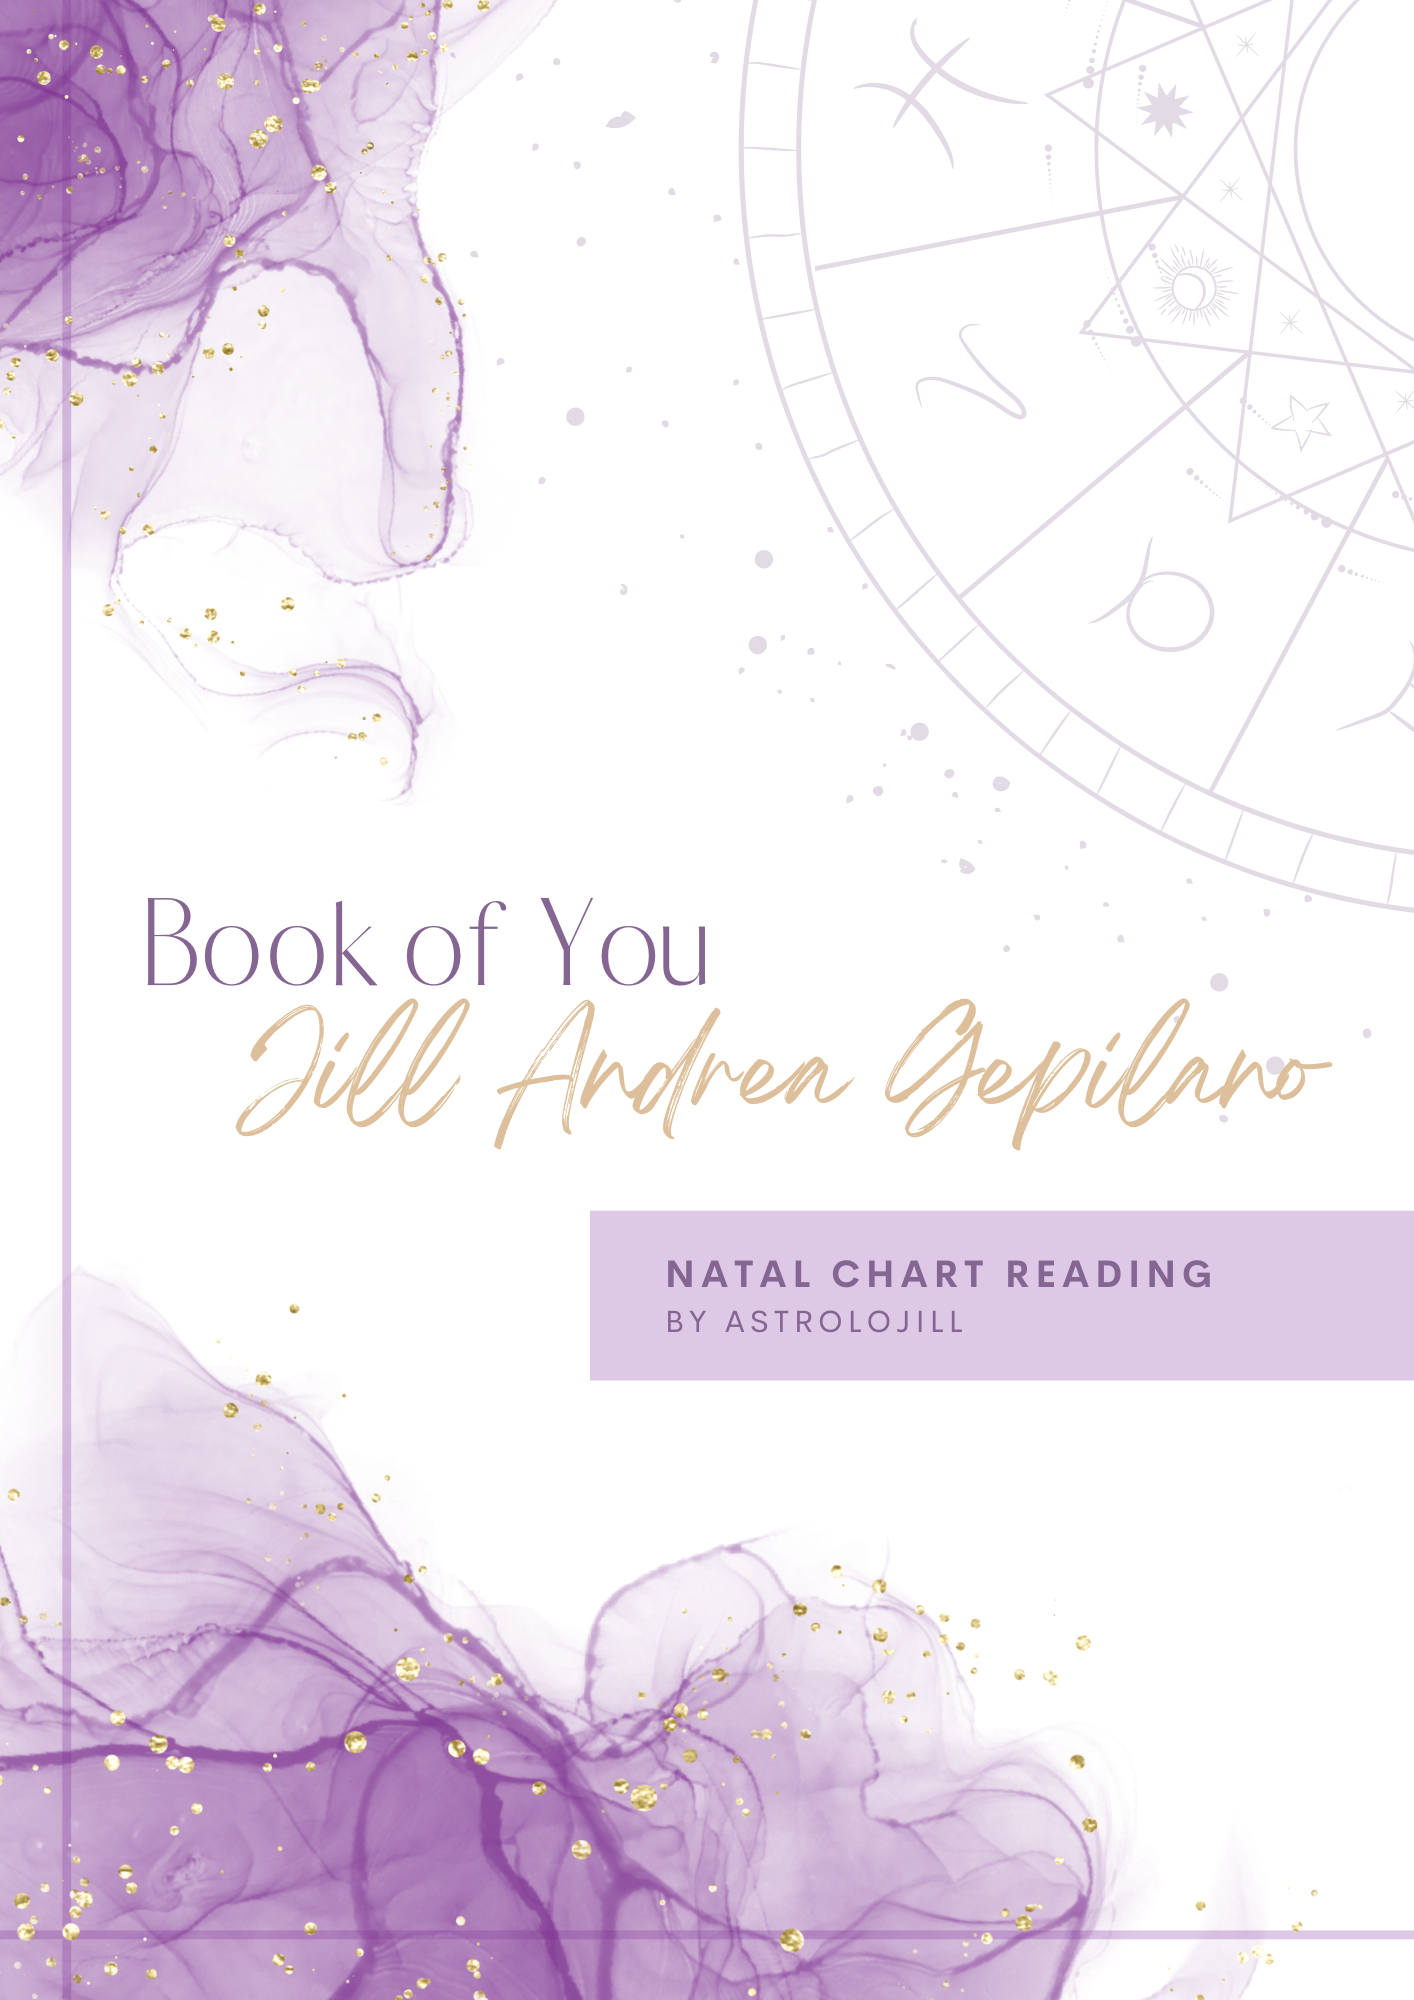 The Book of You - Natal Chart Reading (digital)